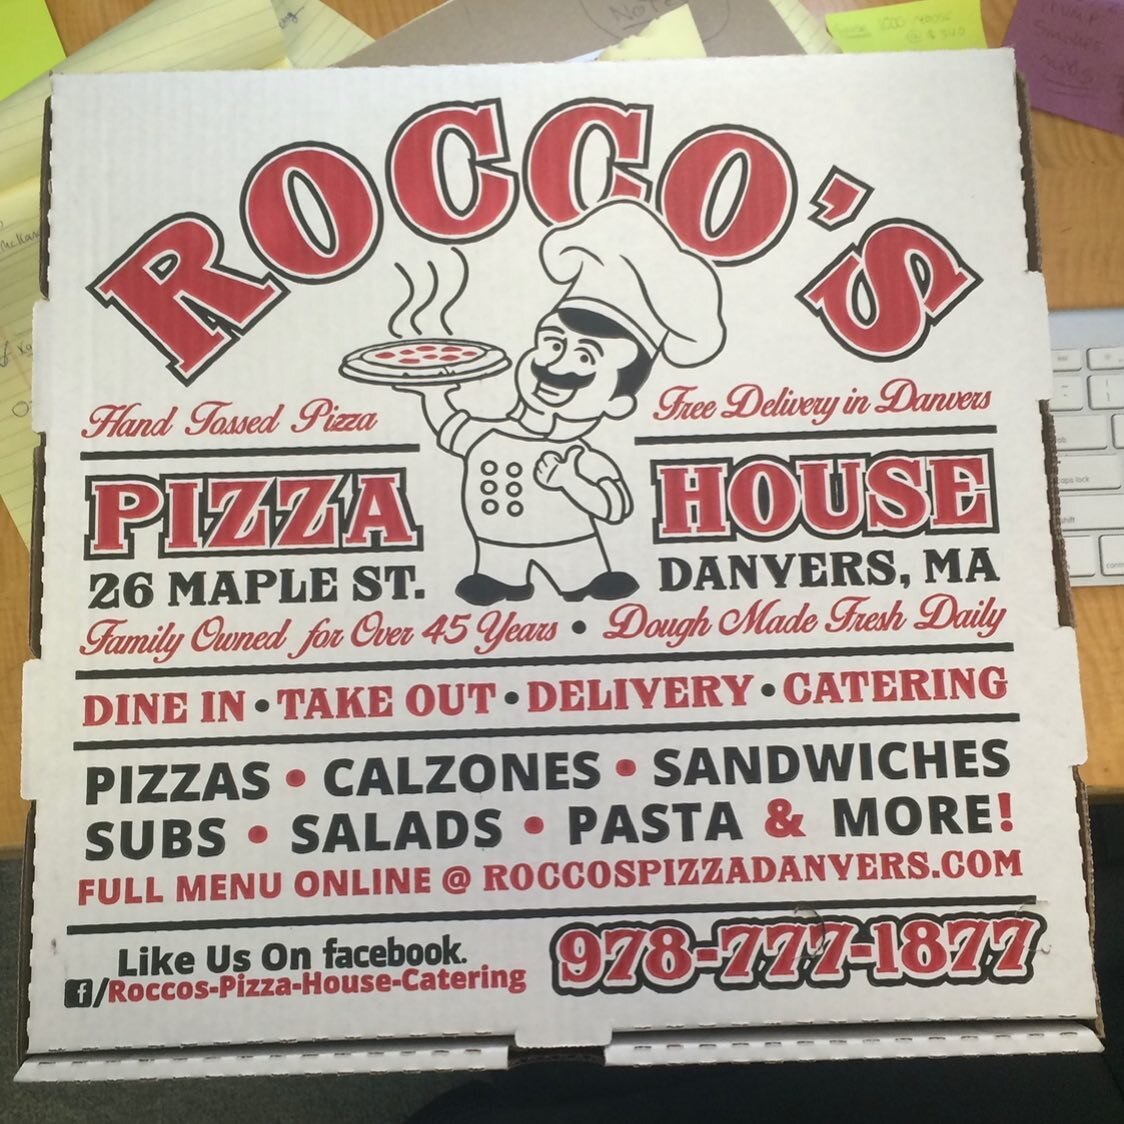 A few years ago I did a logo redesign &amp; rebrand for Rocco&rsquo;s Pizza in Danvers, MA (a @benfranklin_printco client ) This included designs for their shirts, hats, &amp; pizza box. #design #pizza #pizzabox #graphicdesign #logo #branding #neweng